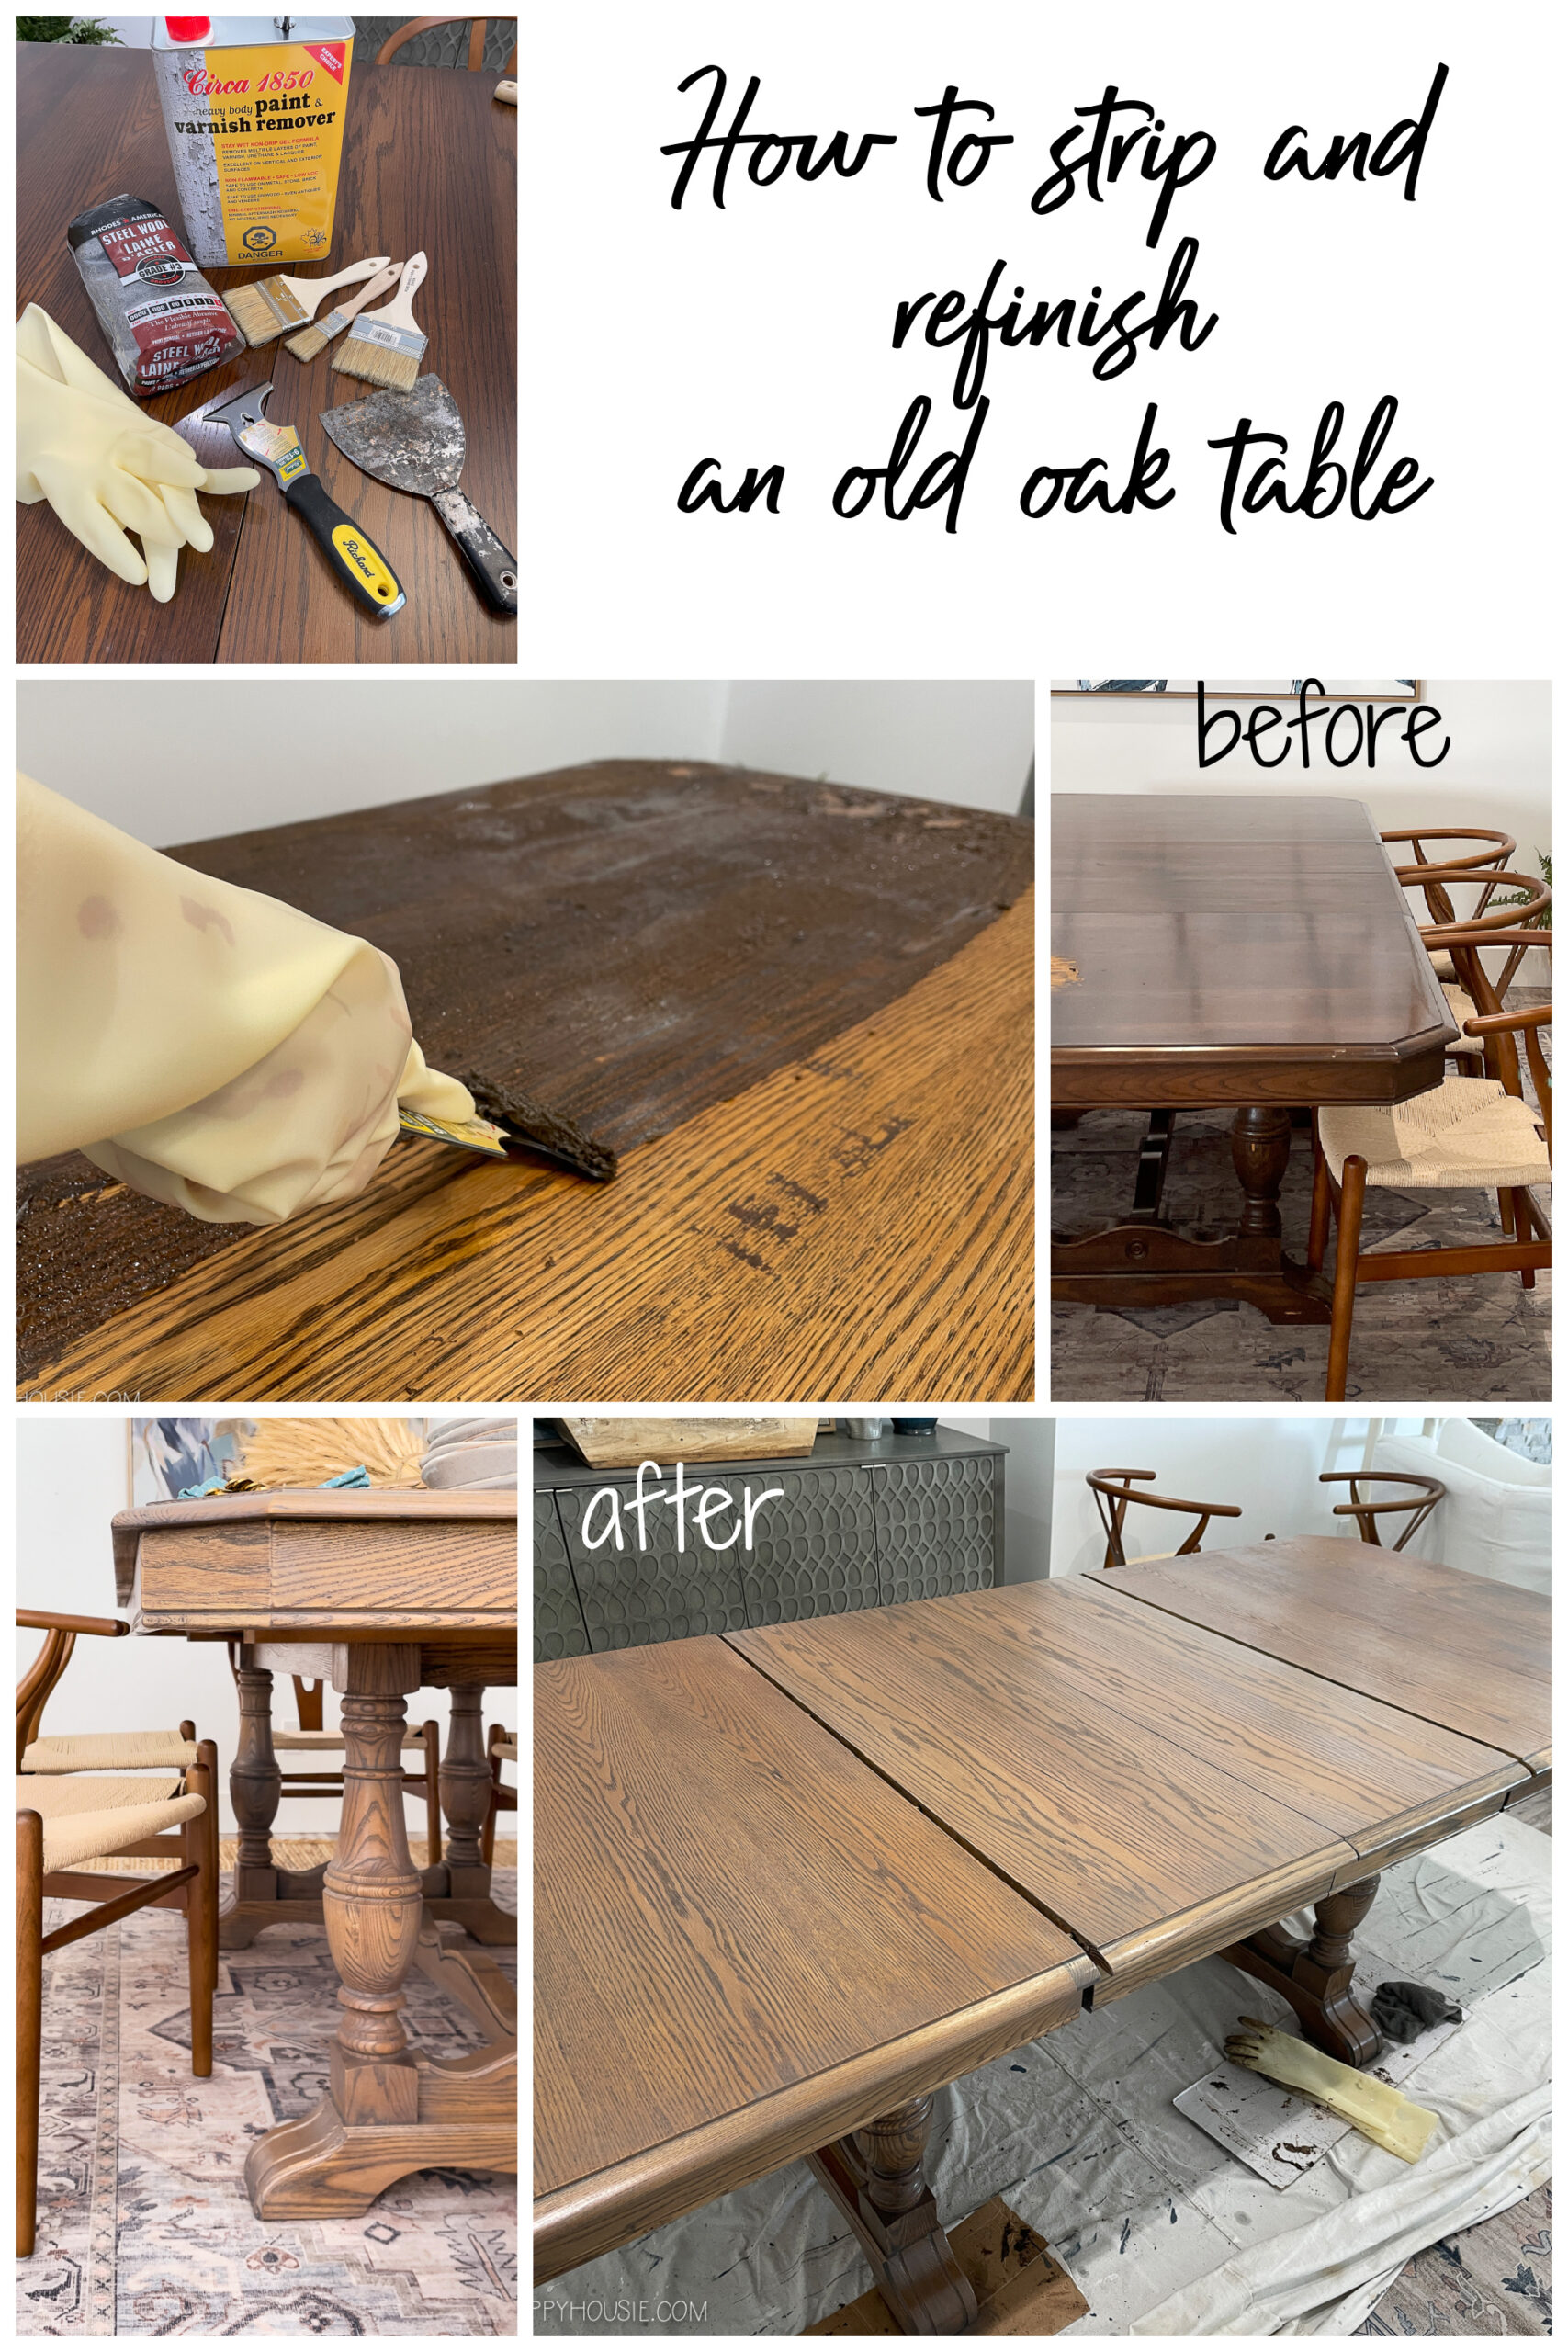 How To Strip and Refinish An Old Oak Table poster.